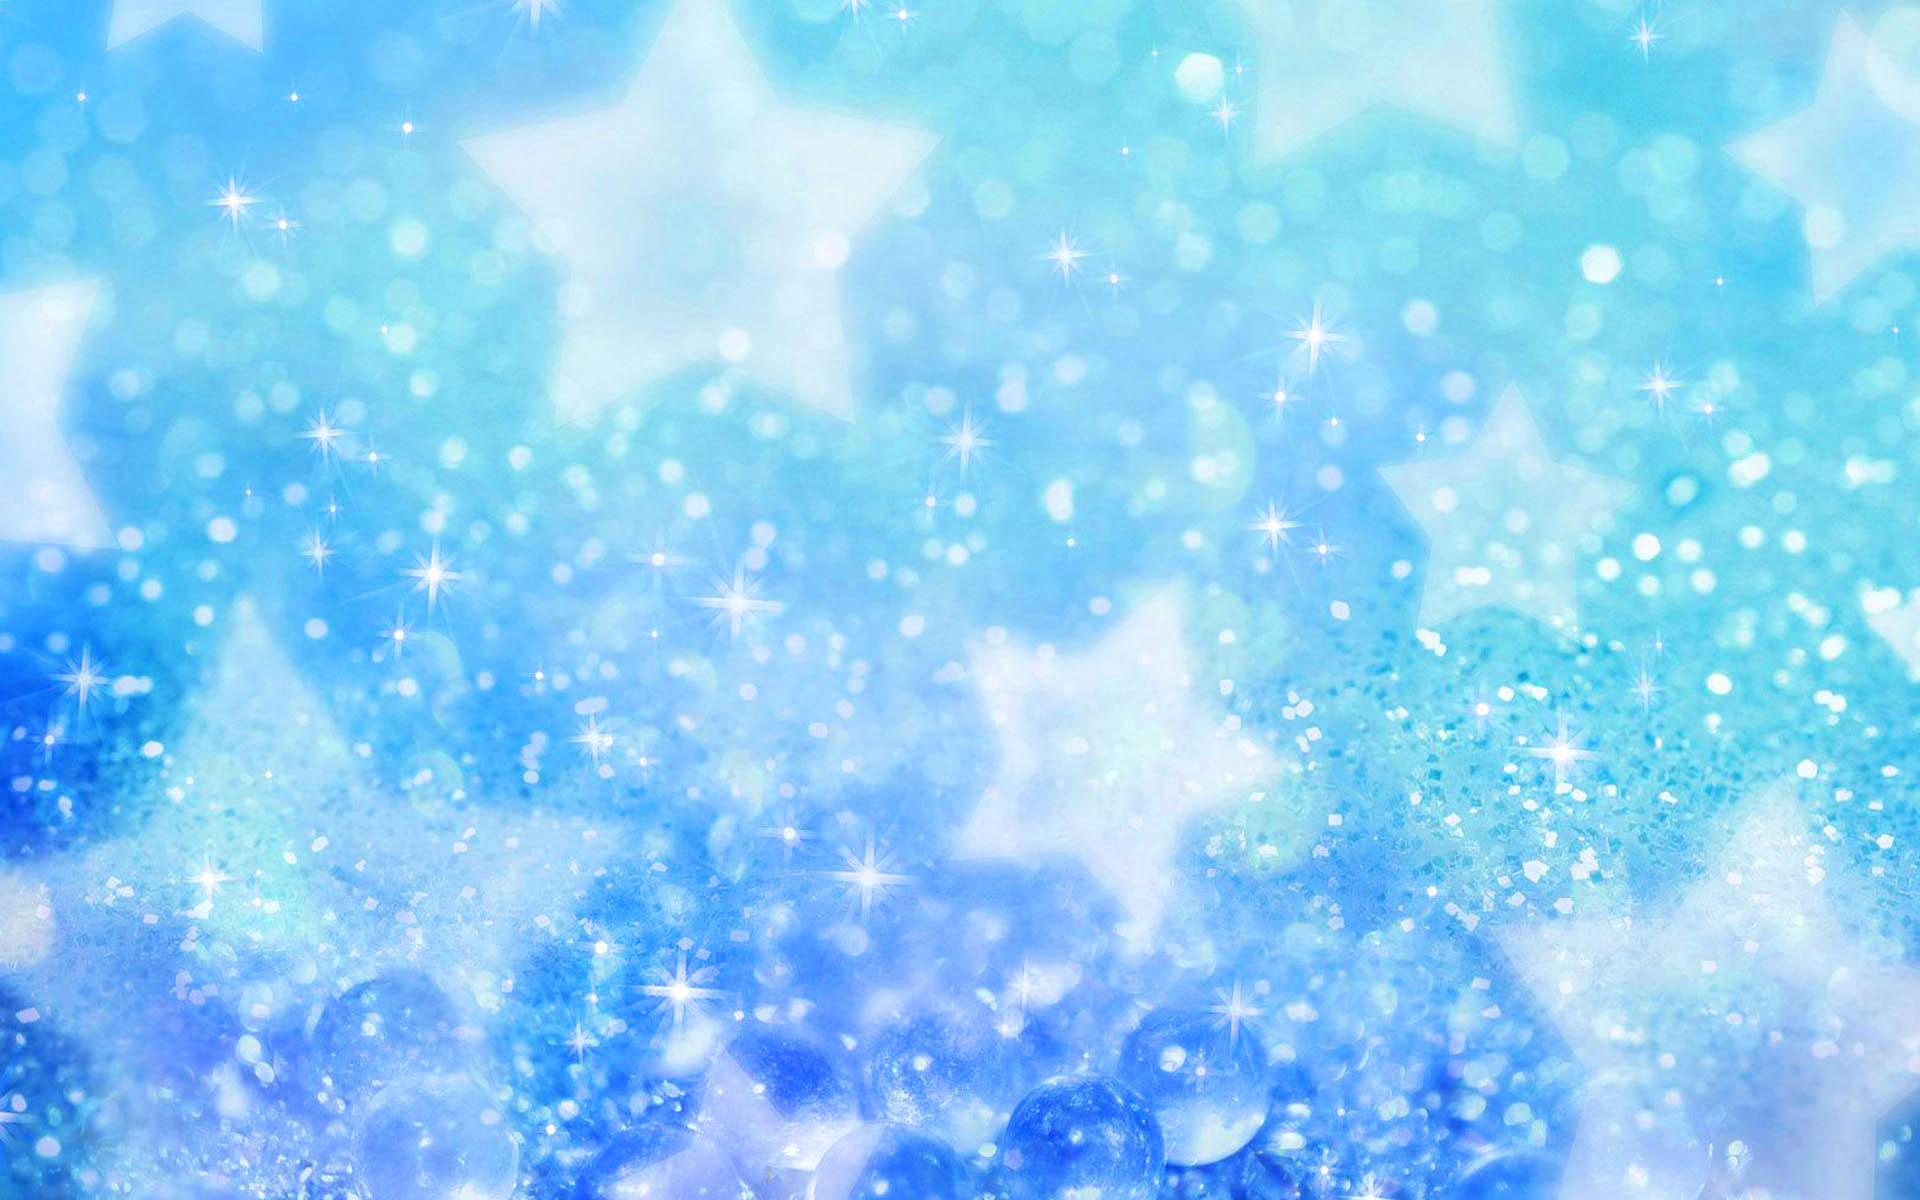 Blue Glitter Vector Art Icons and Graphics for Free Download